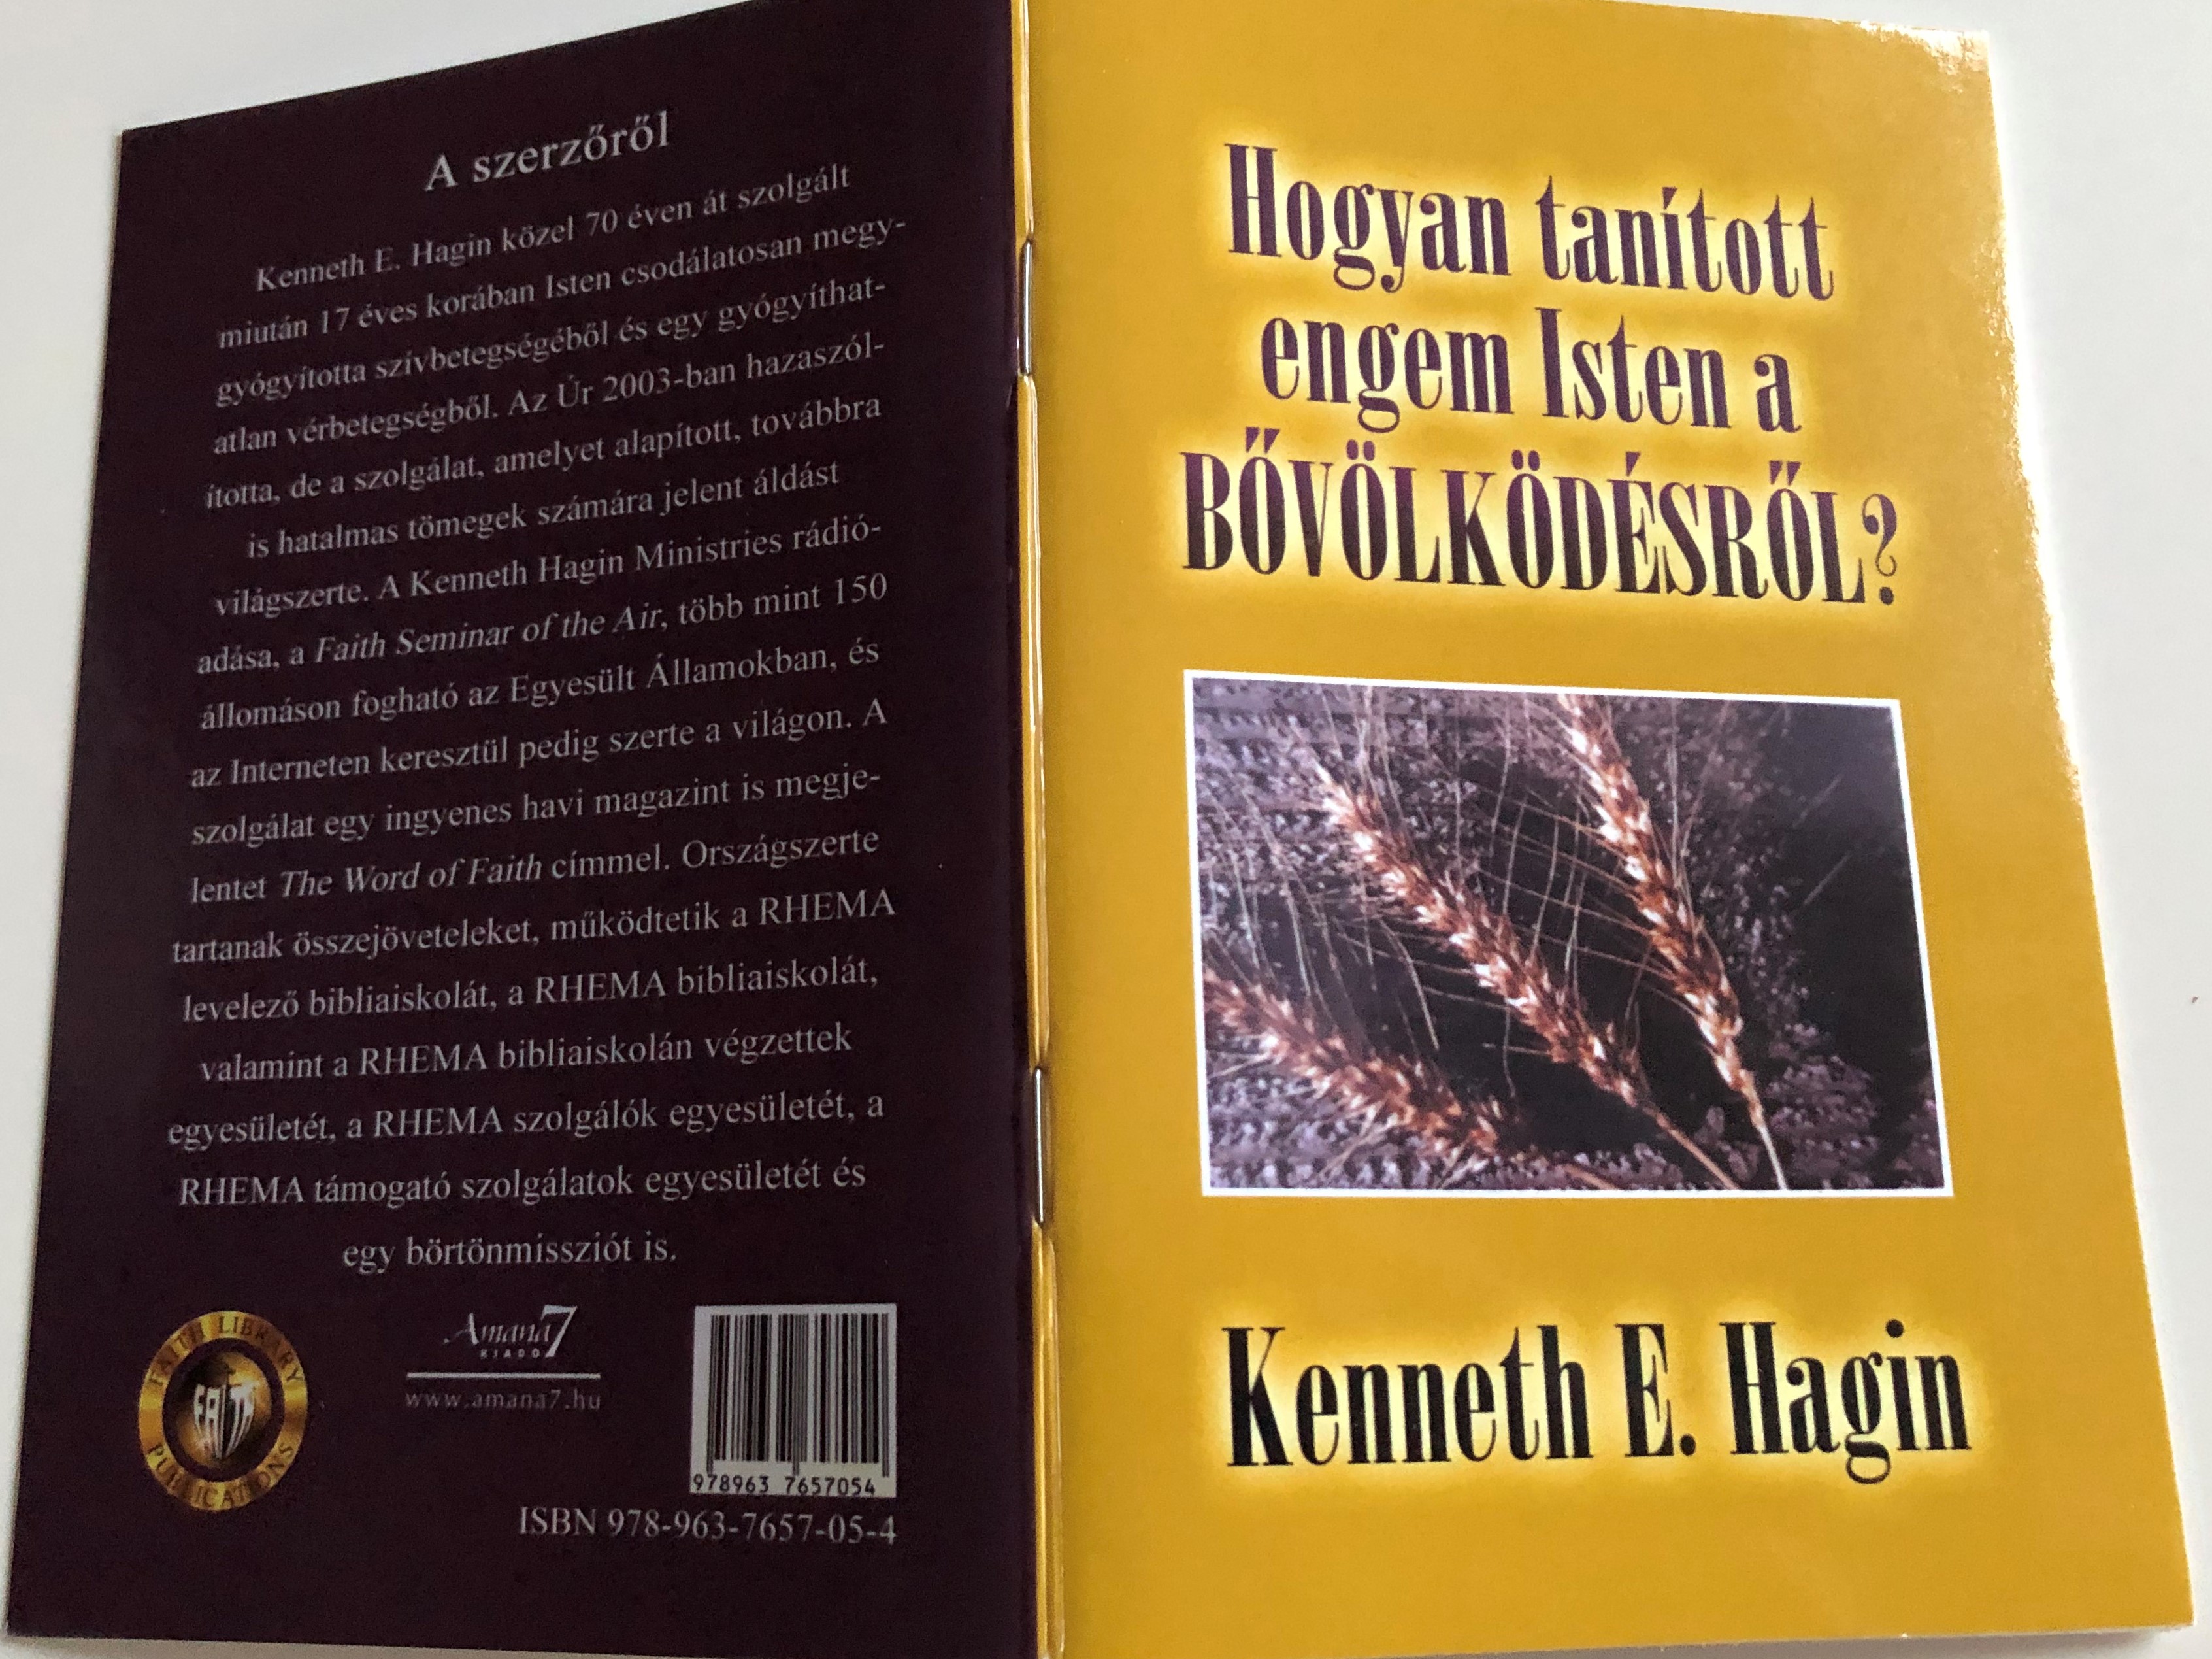 -hogyan-tan-tott-engem-isten-a-b-v-lk-d-sr-l-by-kenneth-e.-hagin-hungarian-edition-of-how-god-taught-me-about-prosperity-6-.jpg